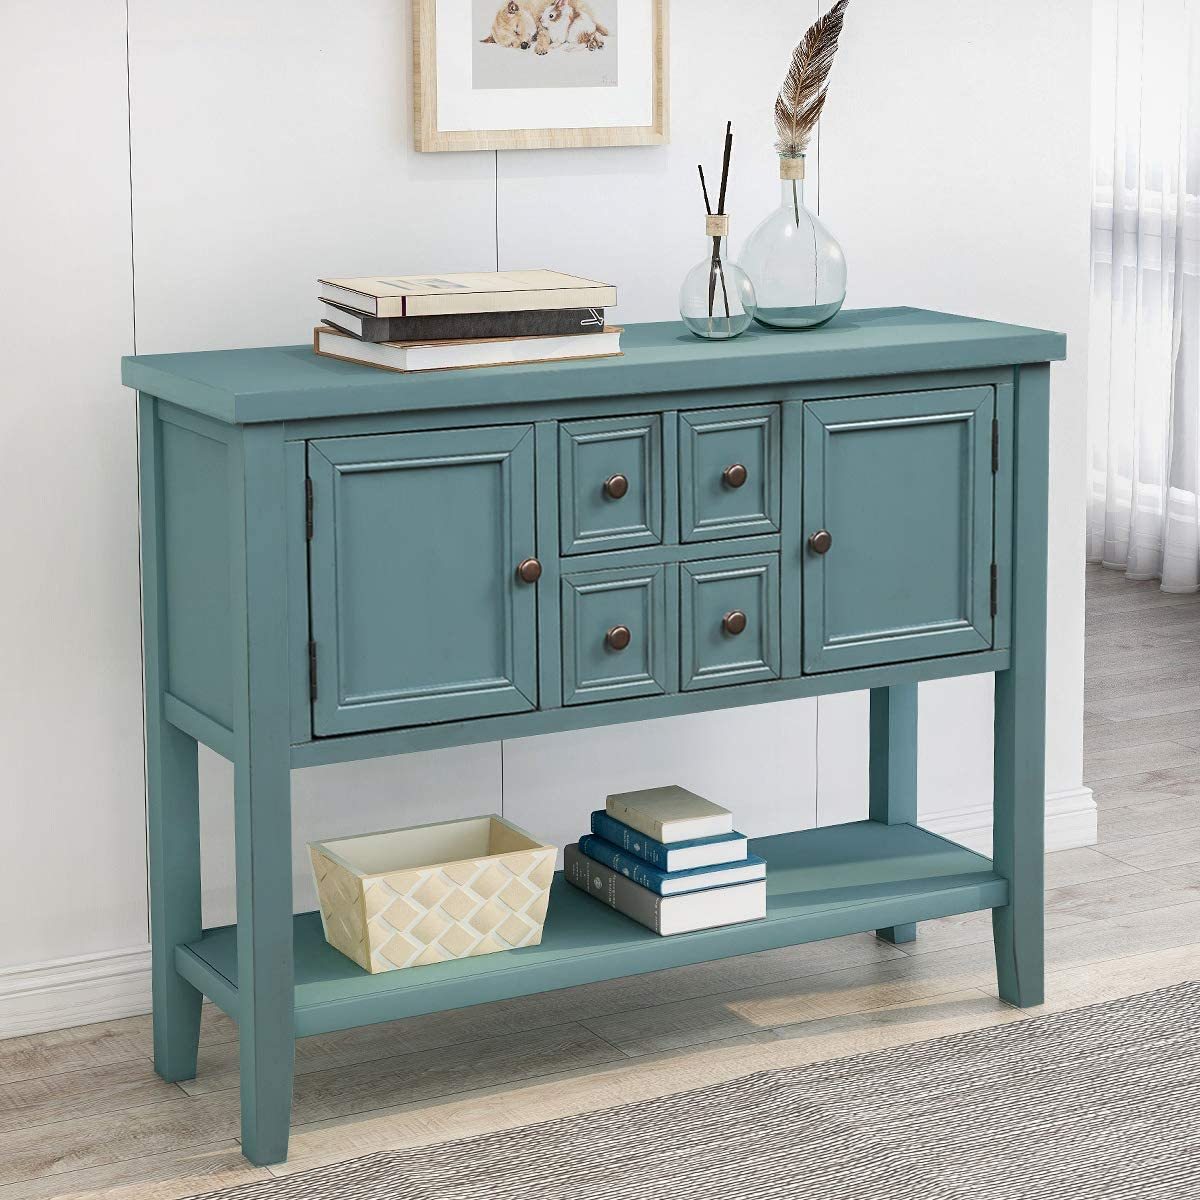 Primary image for Merax Console Sofa Table Sideboard With Storage Drawers Cabinets And, Blue